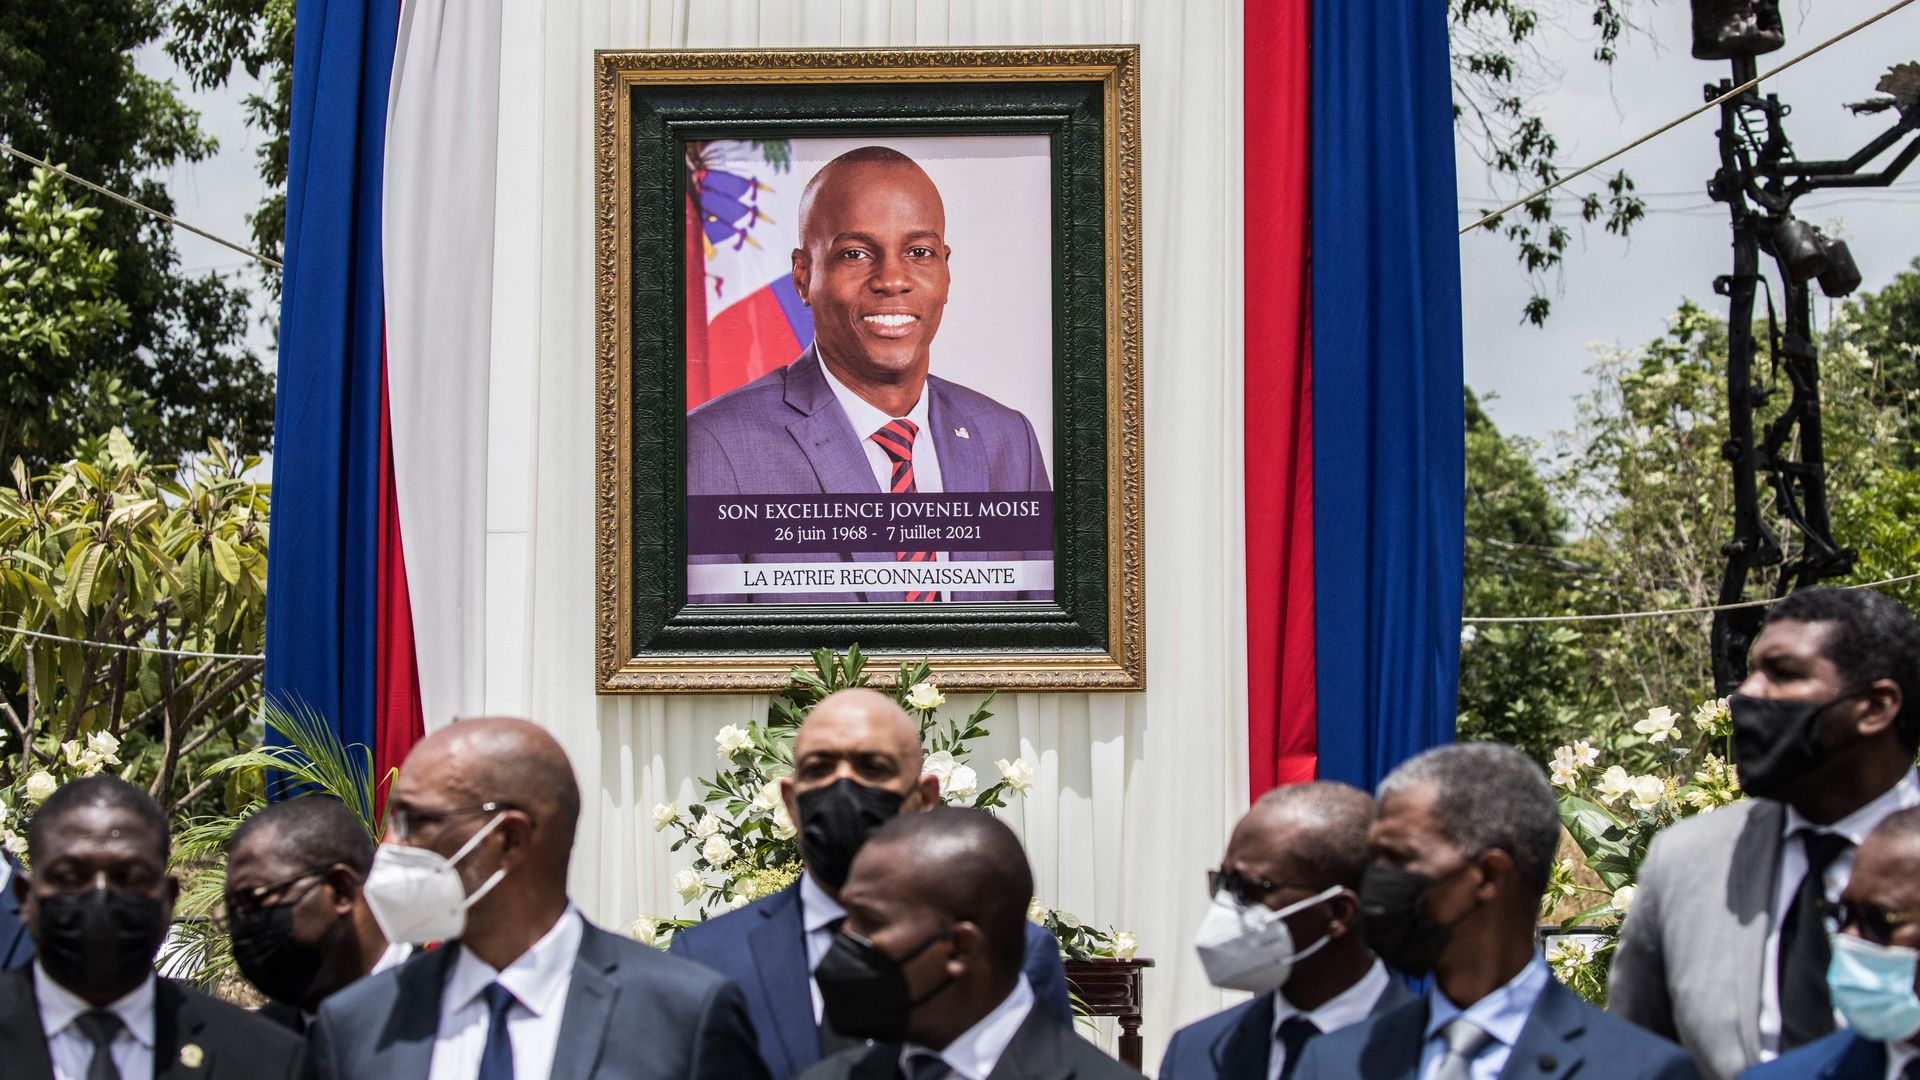 Officials attend a ceremony in honor of late Haitian President Jovenel Moise on July 2021. Photo: Valerie Baeriswyl / AFP